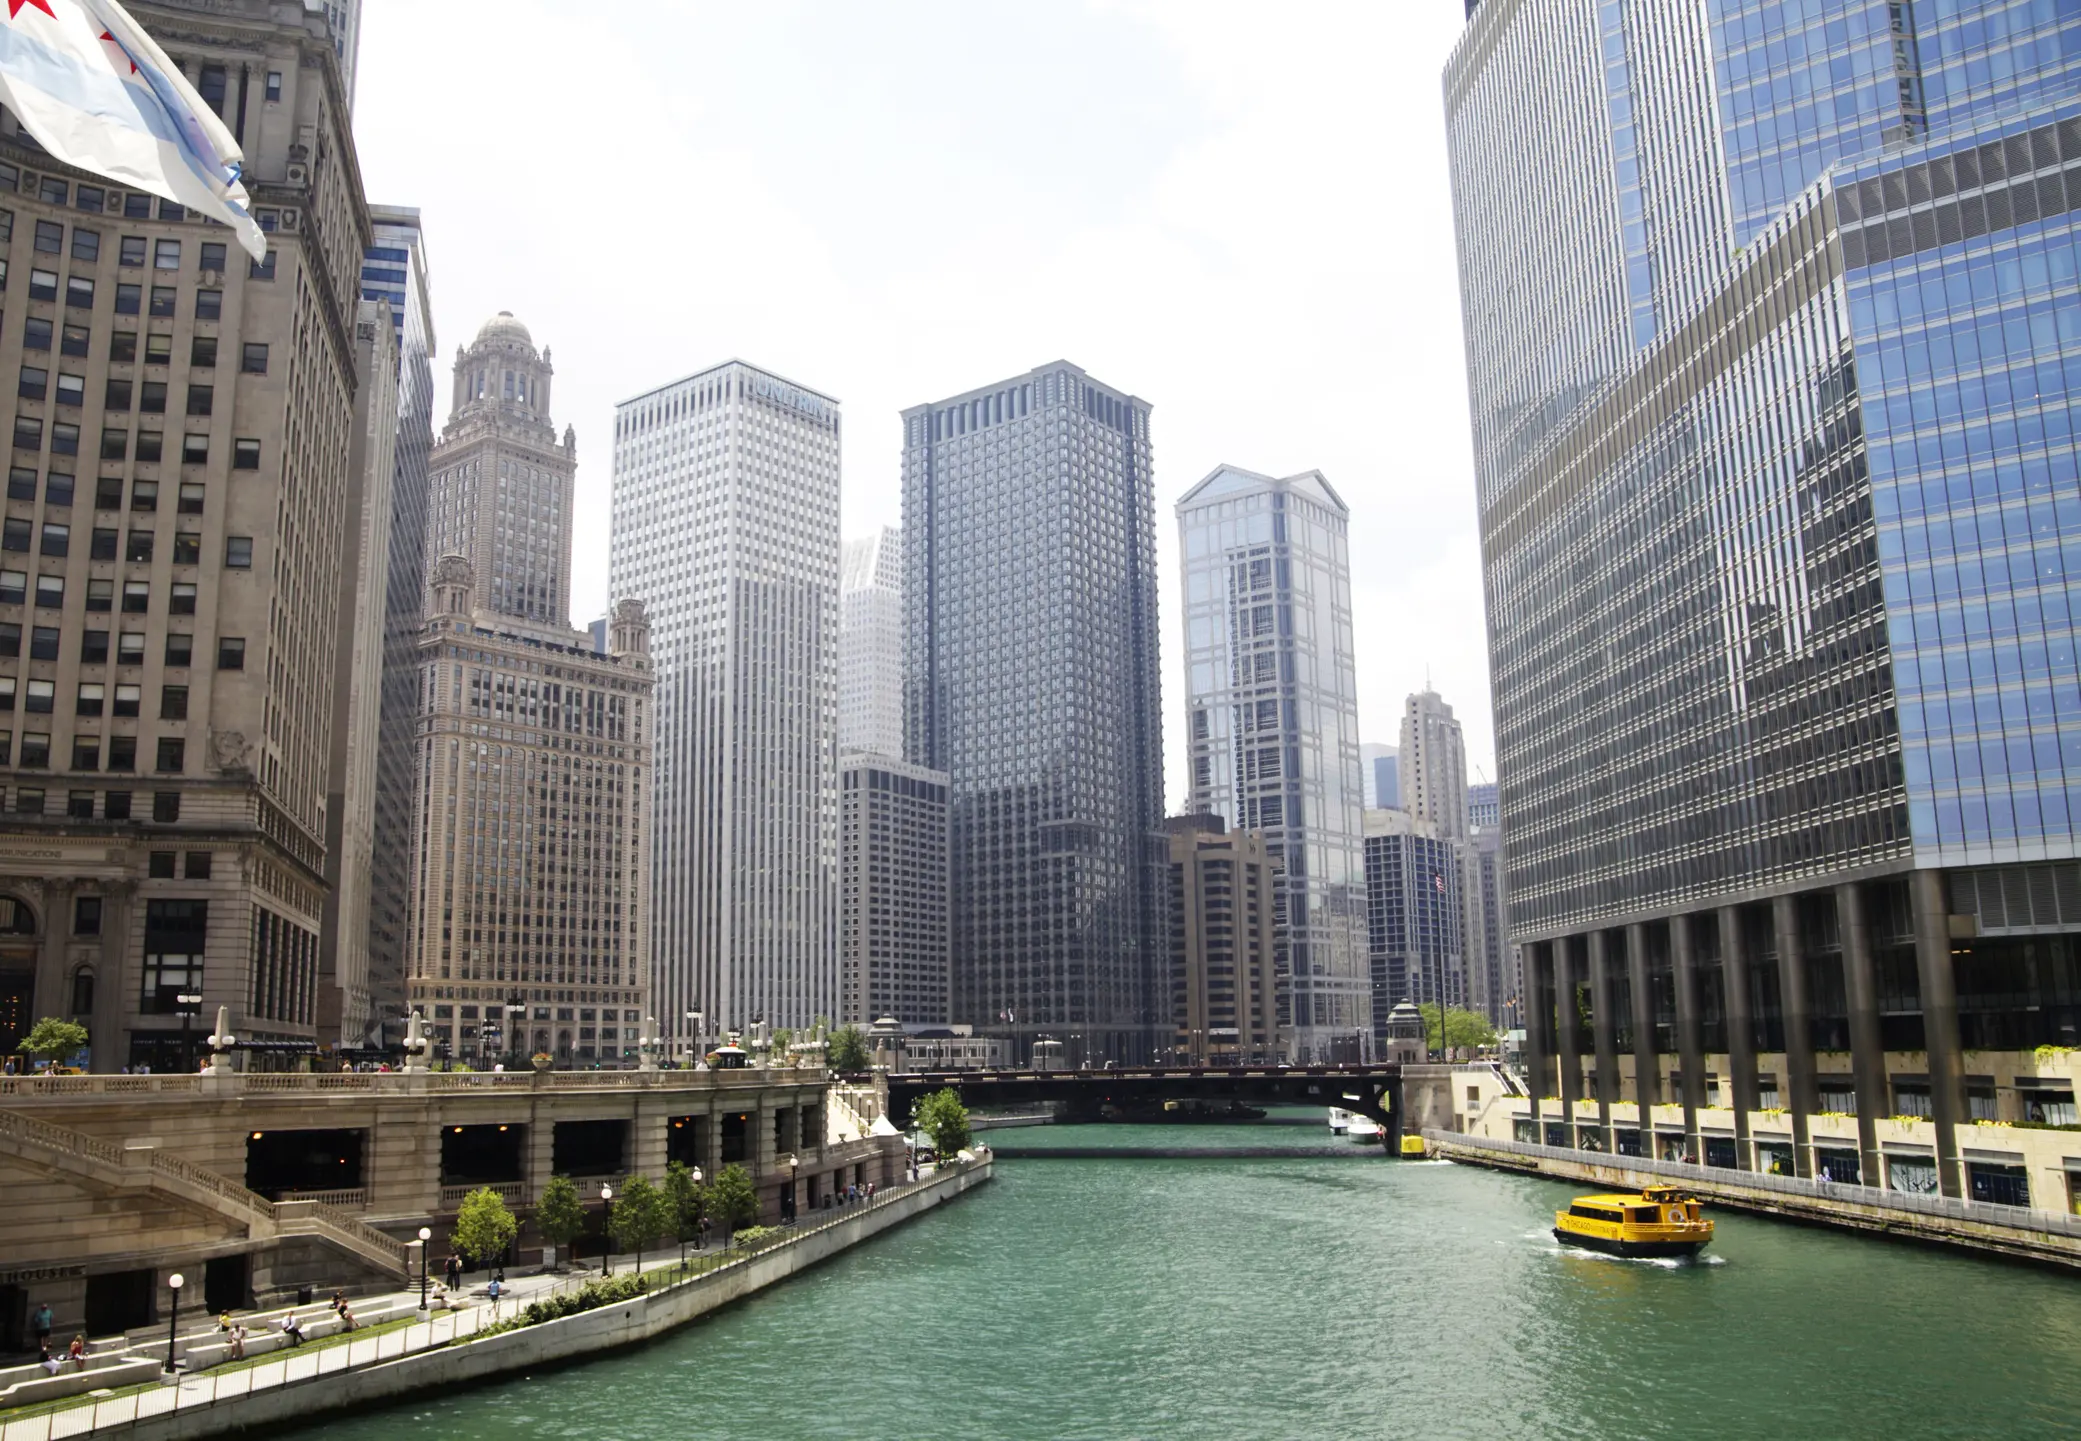 Chicago River Boat Architecture Tours image